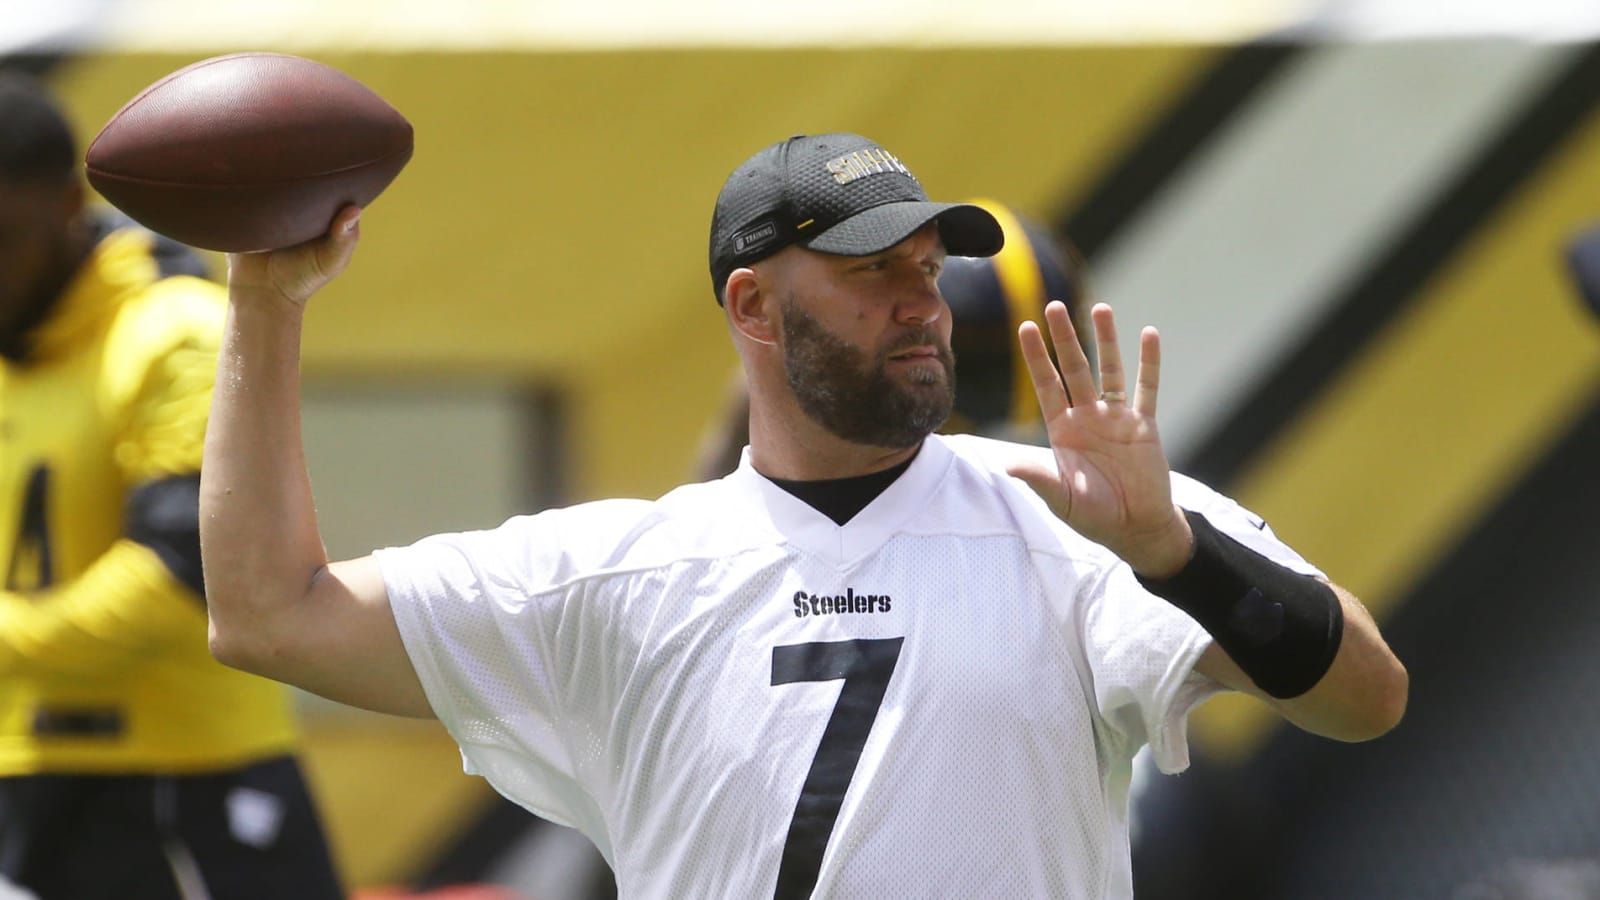 Steelers' Ben Roethlisberger to play Saturday vs. Lions